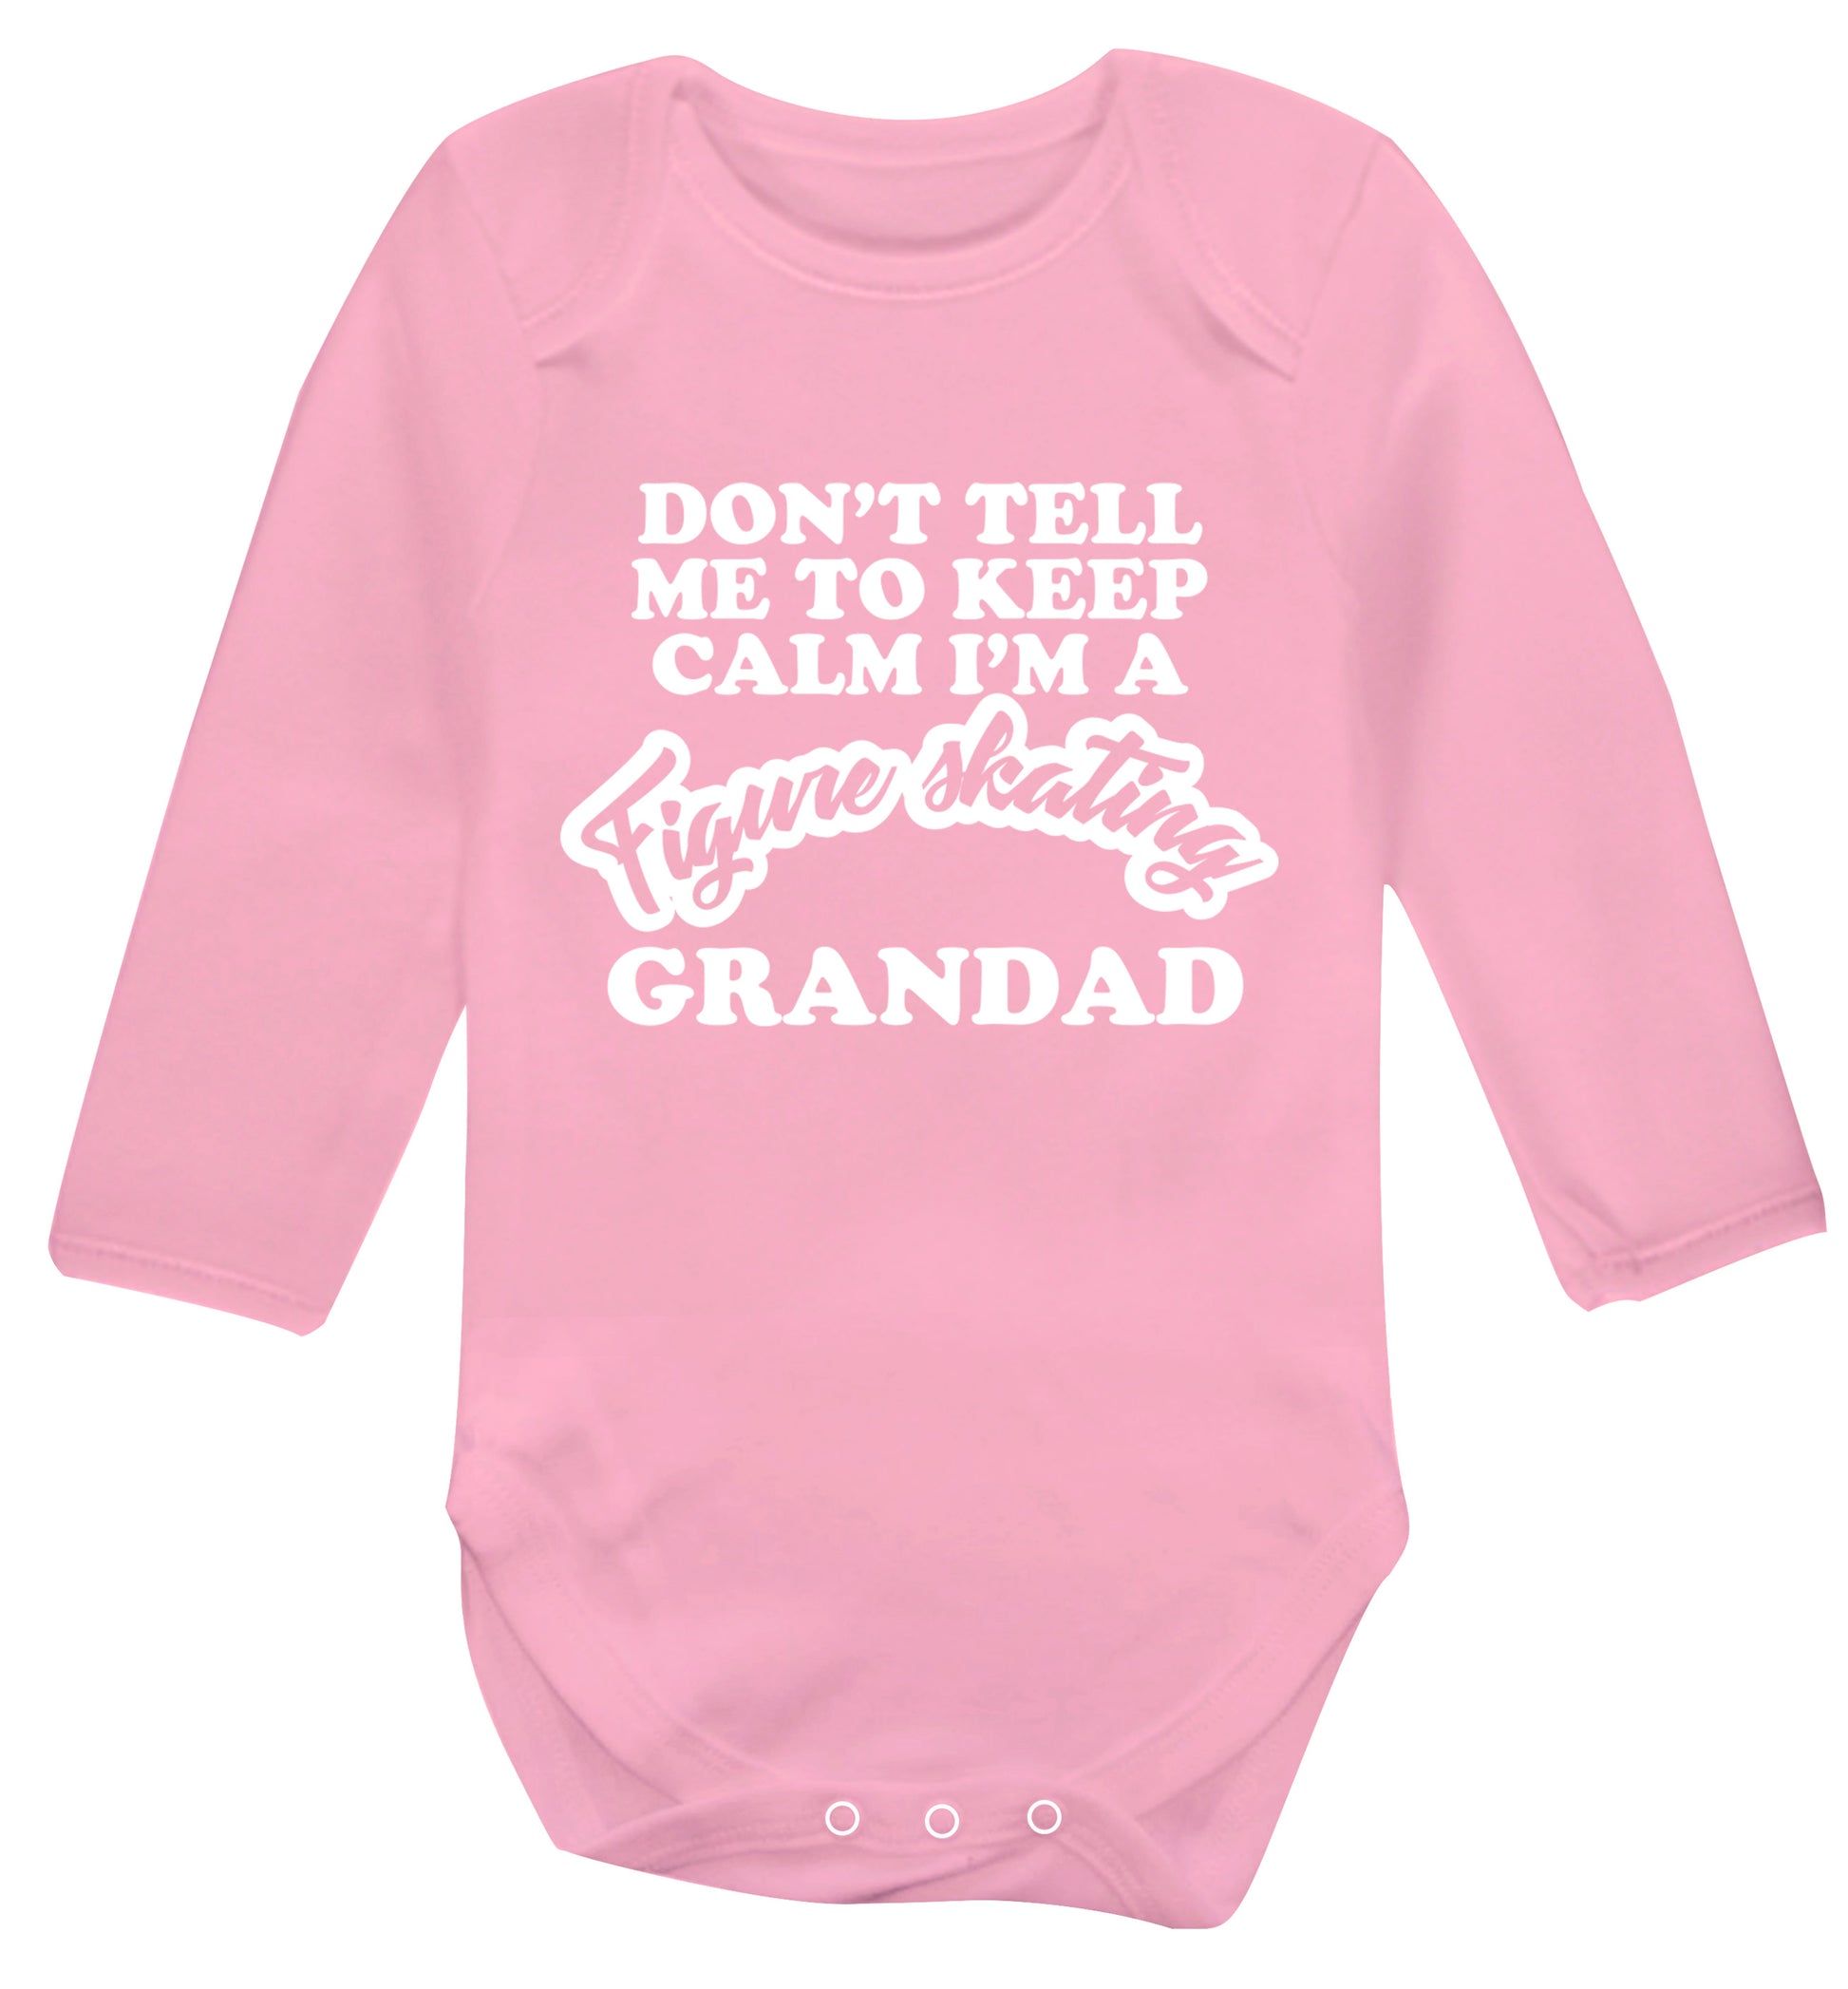 Don't tell me to keep calm I'm a figure skating grandad Baby Vest long sleeved pale pink 6-12 months